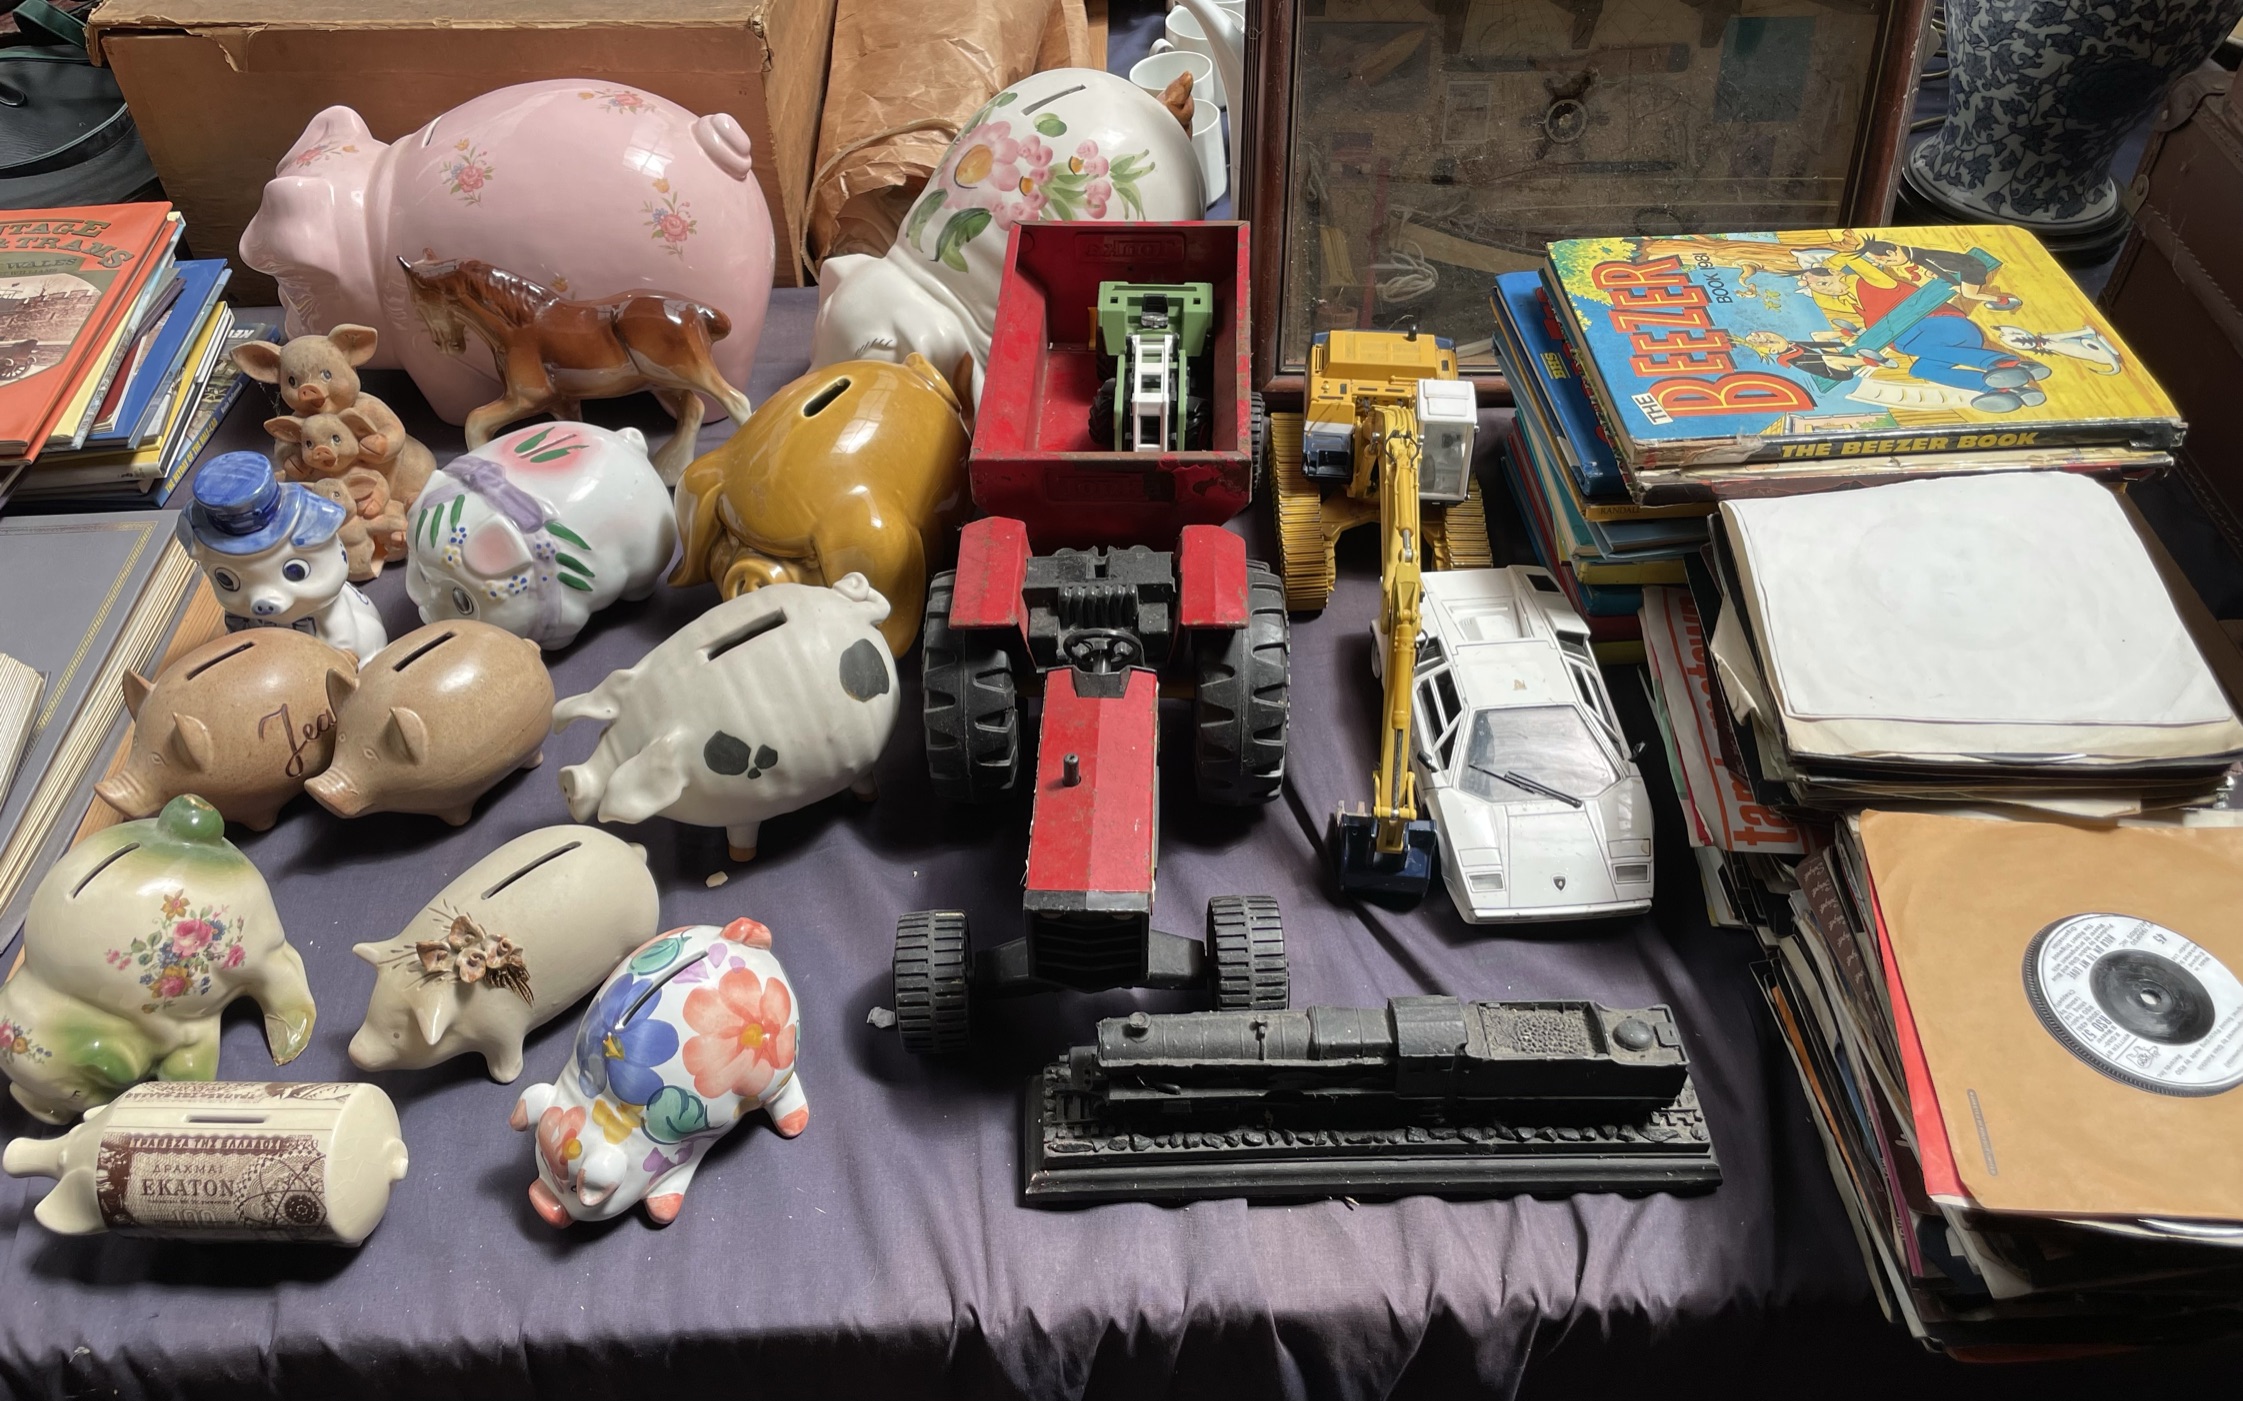 A Tonka toys tractor and trailer together with other toys, children's annuals, ship diorama,